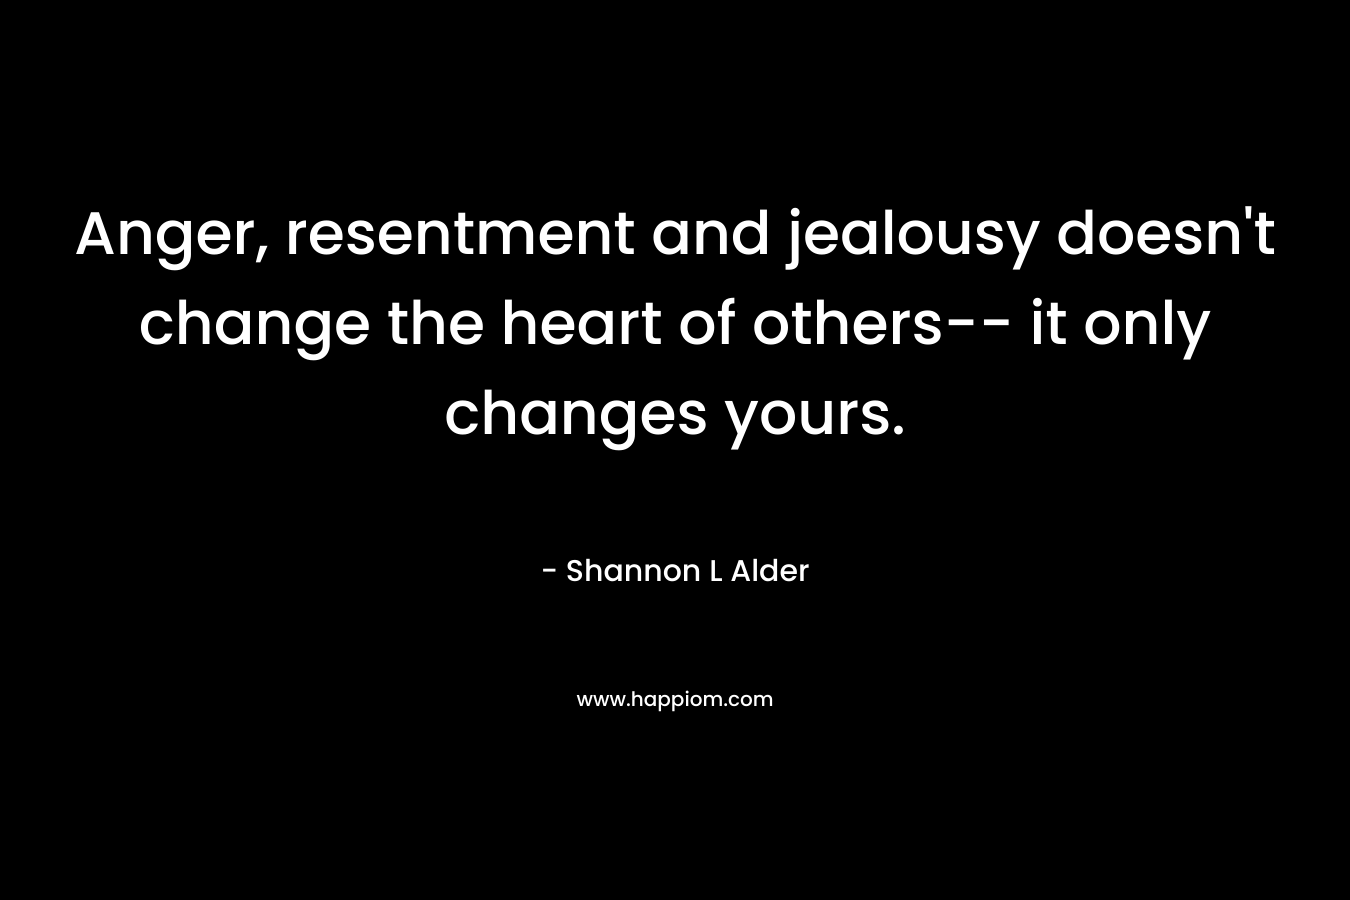 Anger, resentment and jealousy doesn't change the heart of others-- it only changes yours.